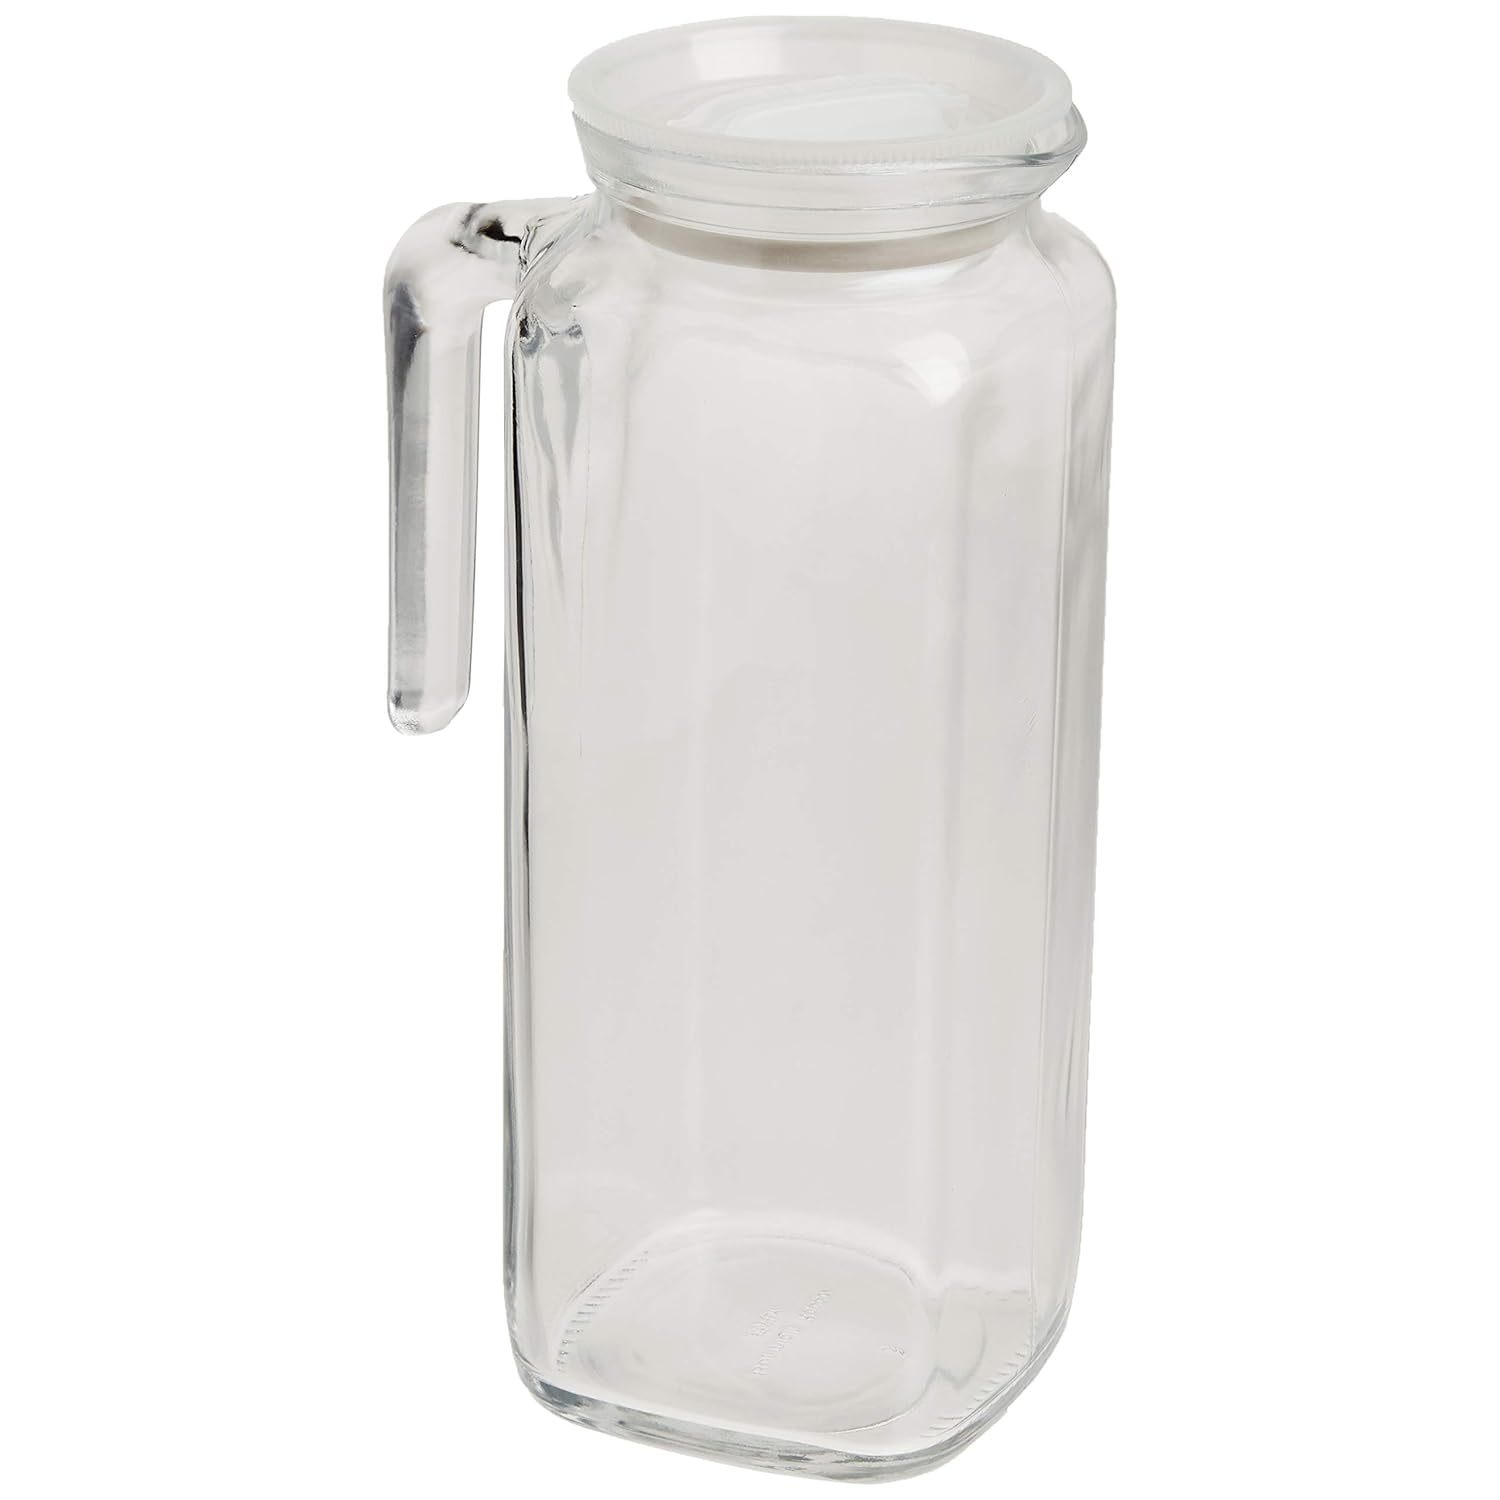 Bormioli Rocco Glass Frigoverre Jug with Airtight Lid 33.75oz, Set of 1, Frosted - $42.99